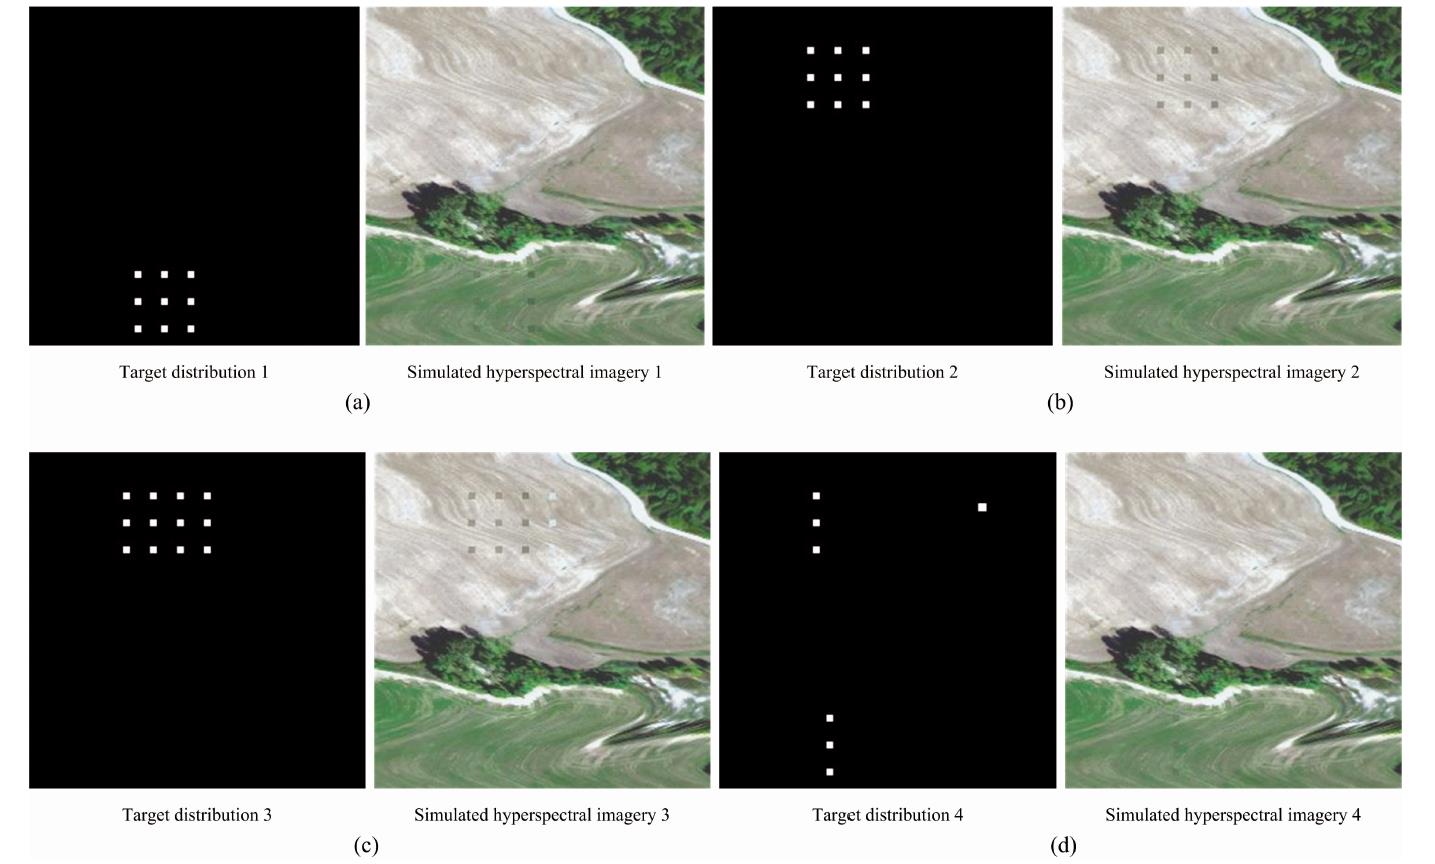 Test scenarios(a): Grassland background and vegetation camouflage target; (b): Soil background and vegetation camouflage target; (c): Soil background and vegetation and cement road camouflage targets; (d): Grassland/cement road/soil background and its corresponding camouflage targets